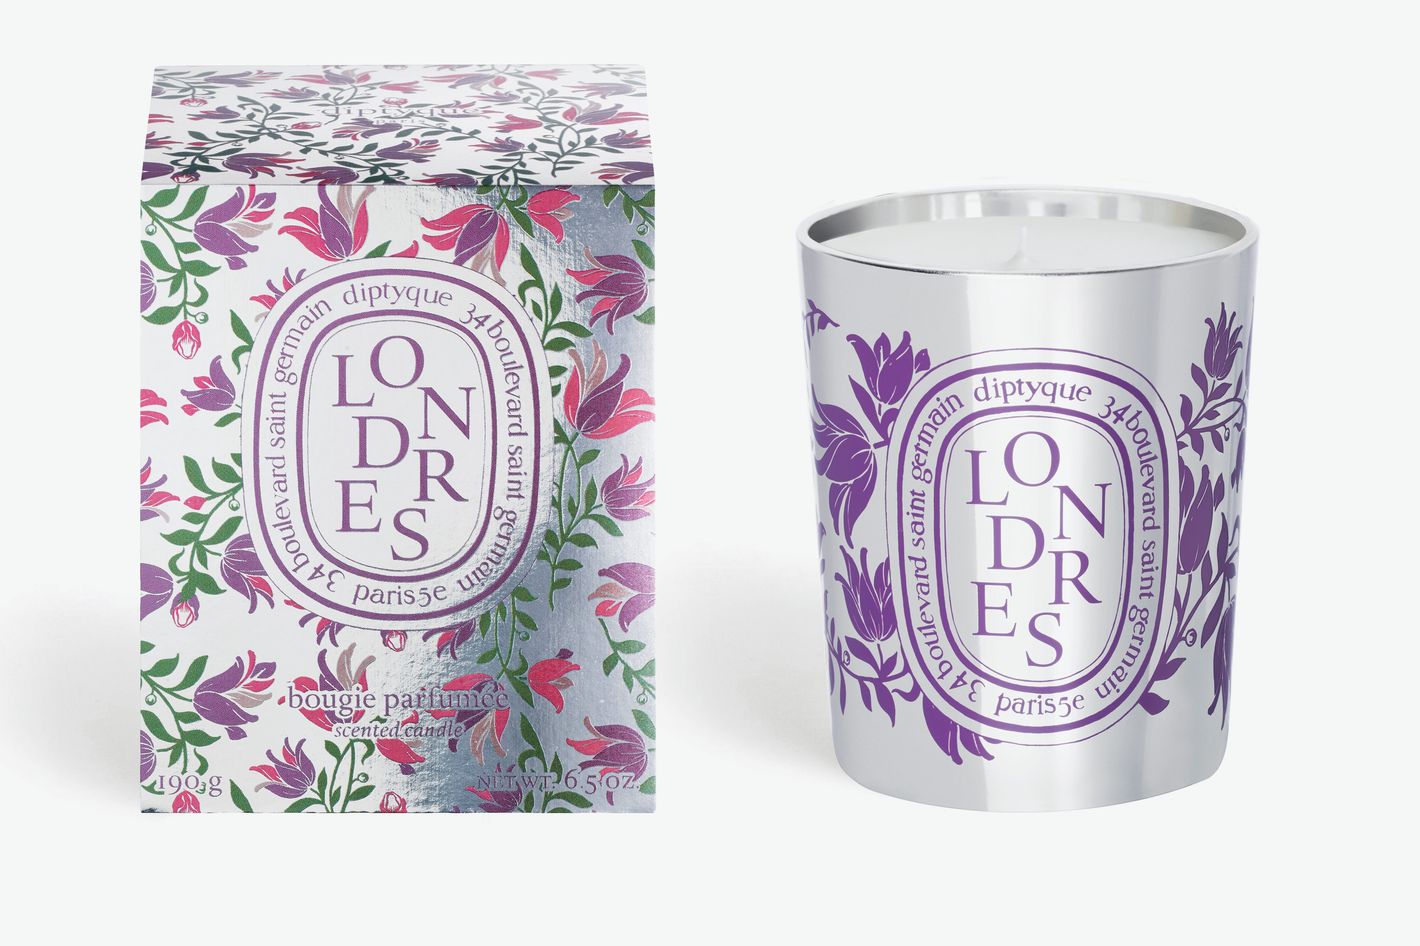 Diptyque's City Candles Will Be Available for a Limited Time